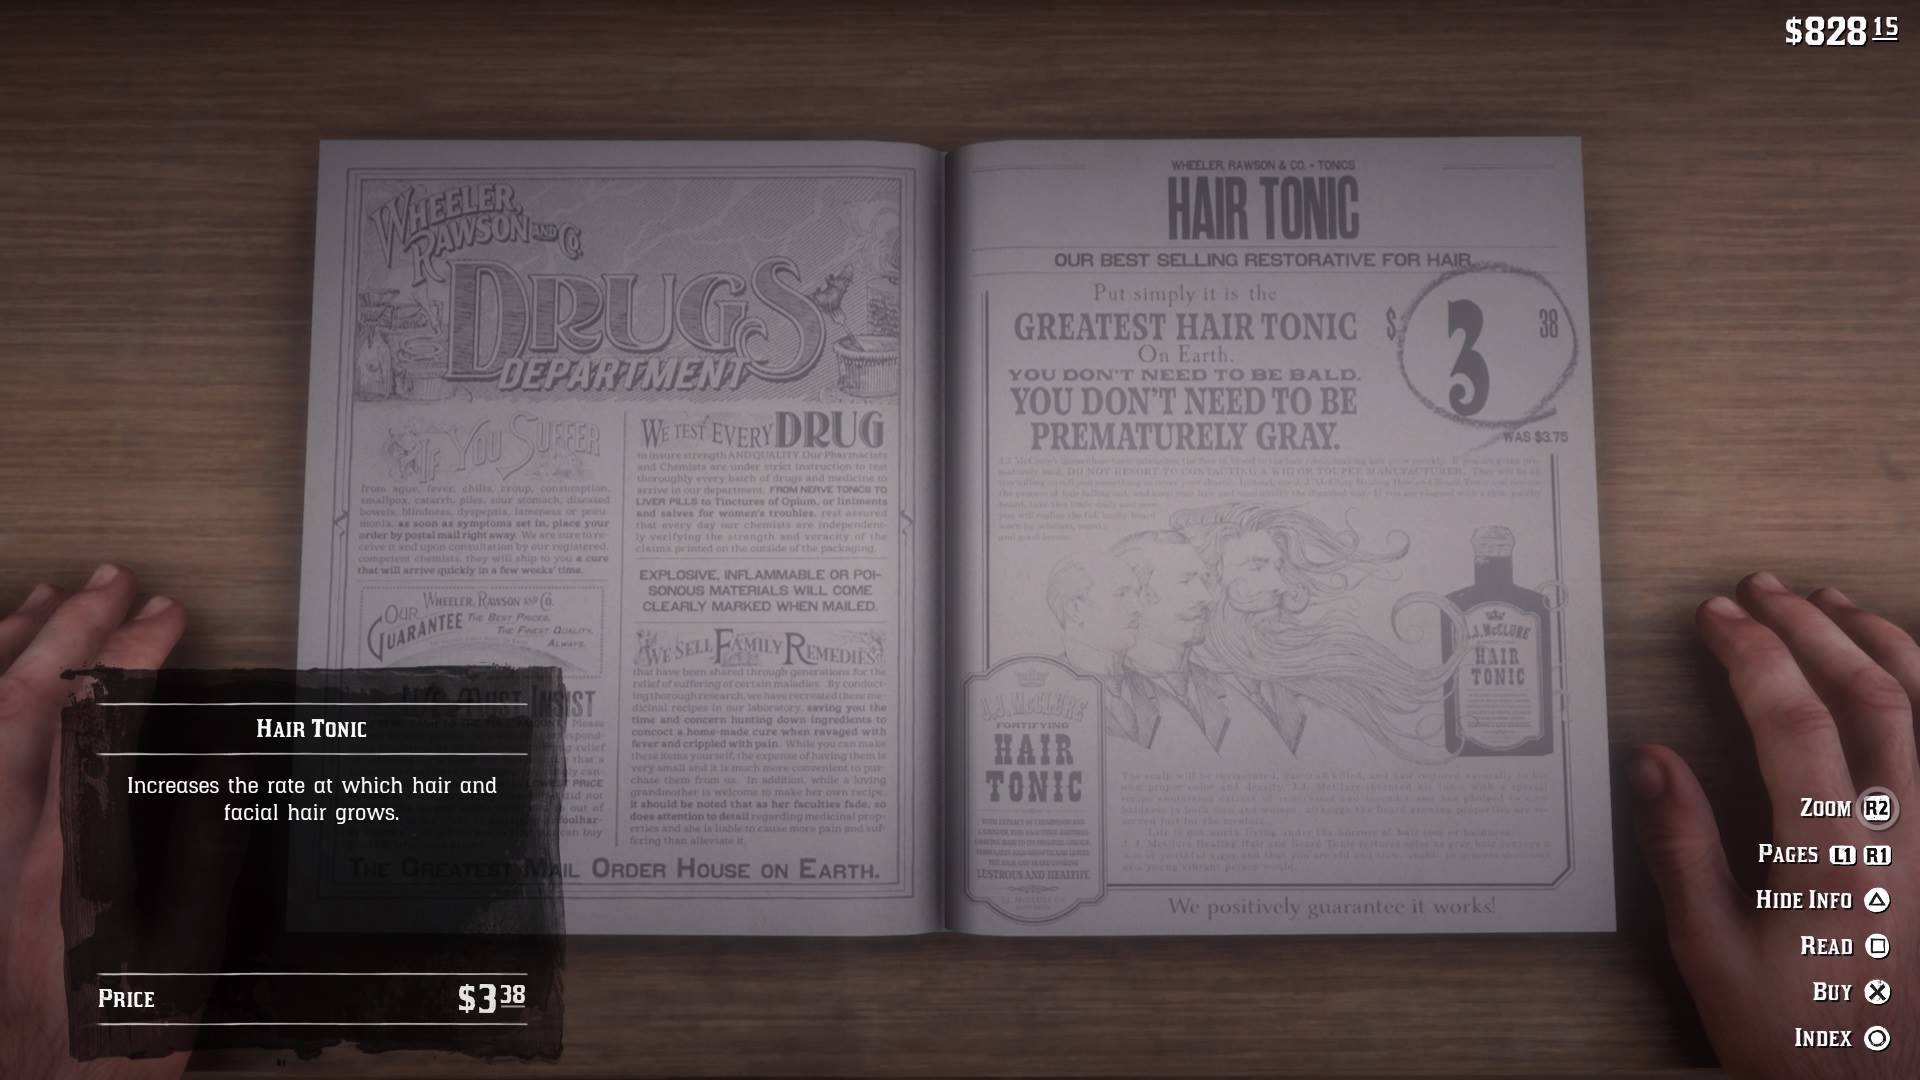 Red Dead Redemption 2: Find Hair Tonic in the catalog at any General Store.